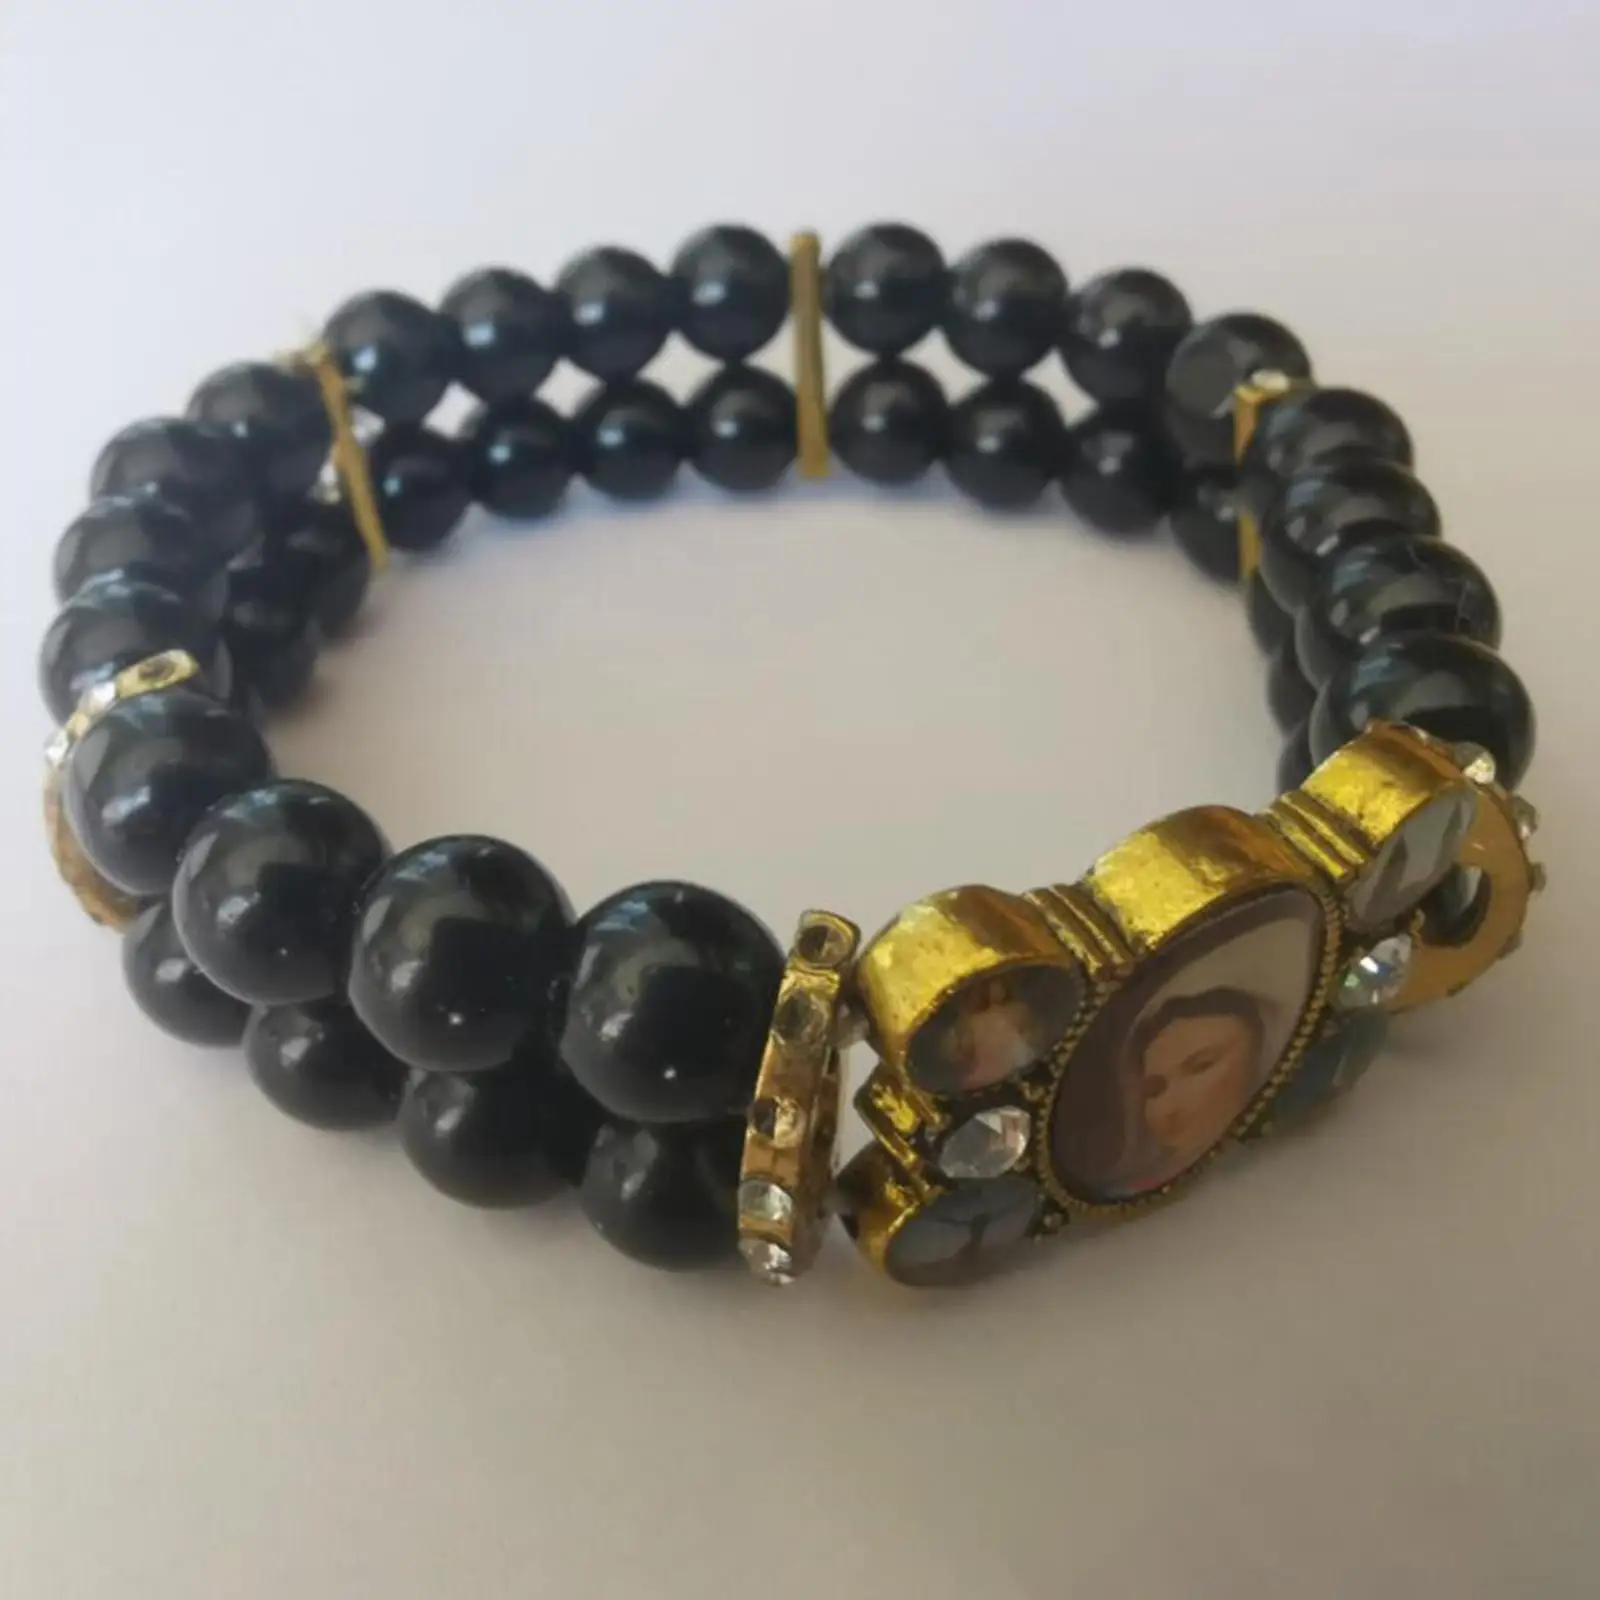 Strechable Beaded Bracelet Gifts with Images of Religious Unique Bangle for Men Prayer